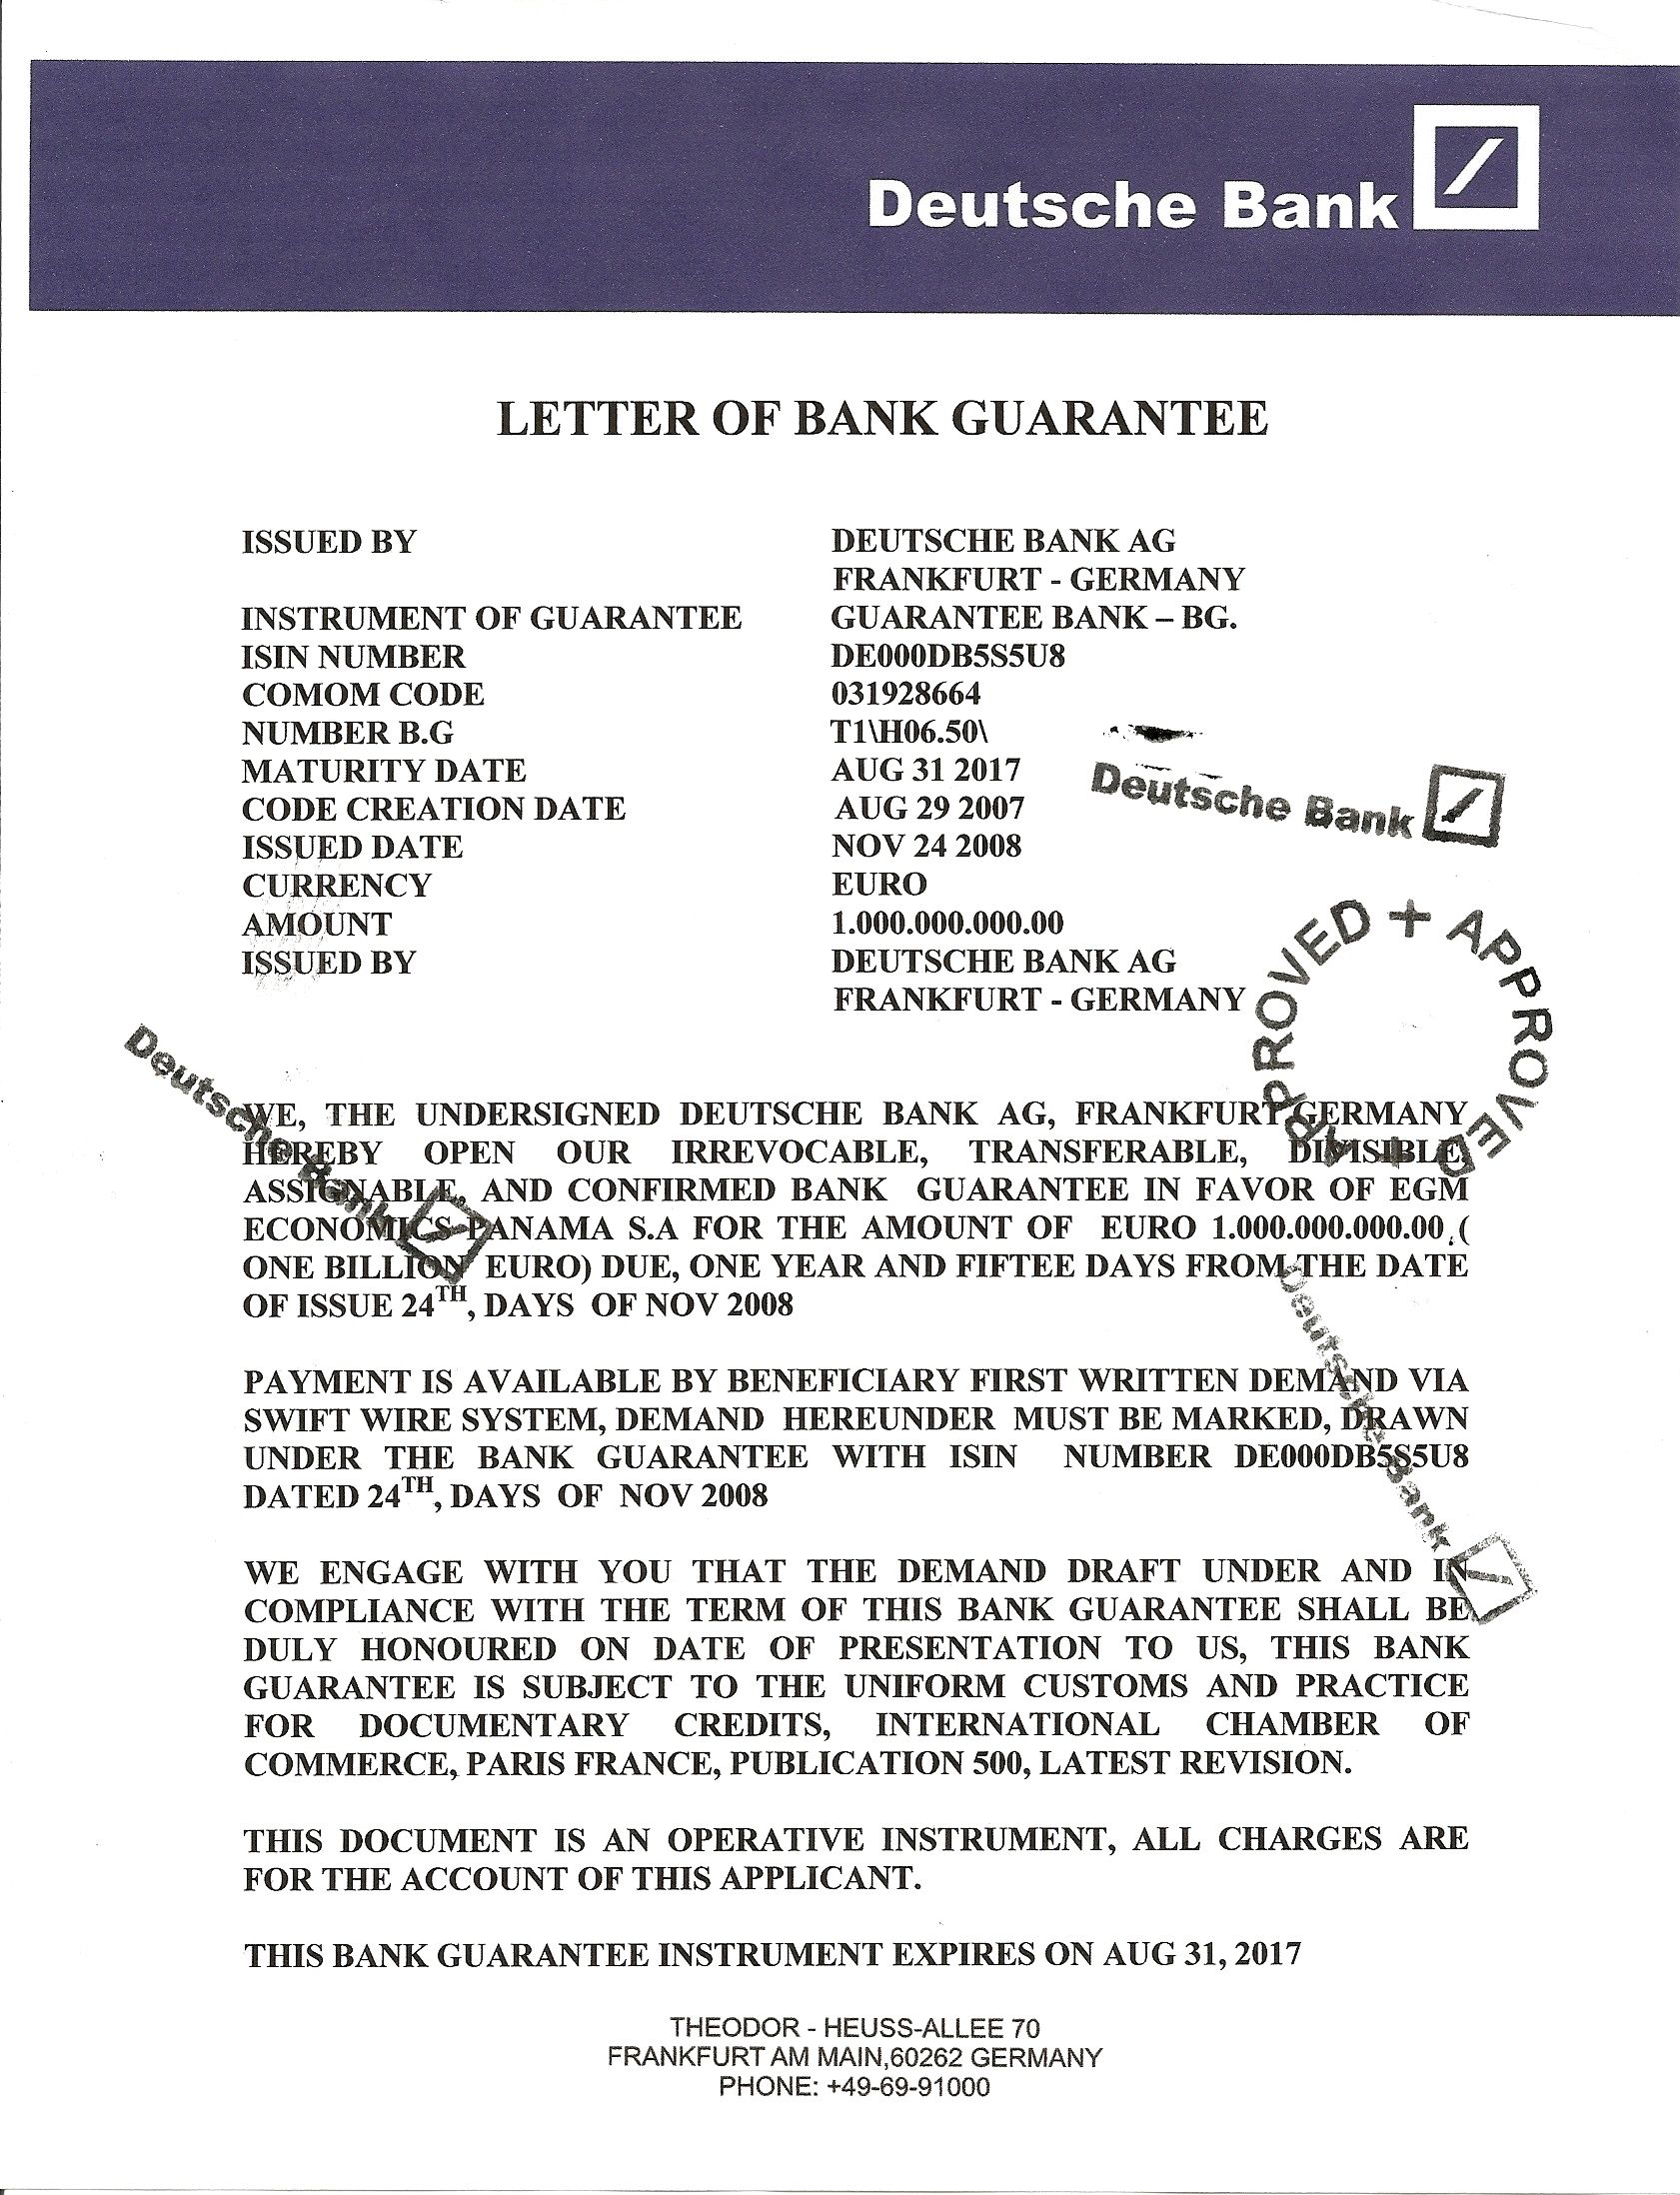 BANK DOCUMENTS | PPP KINGDOM | Page 21681 x 2196